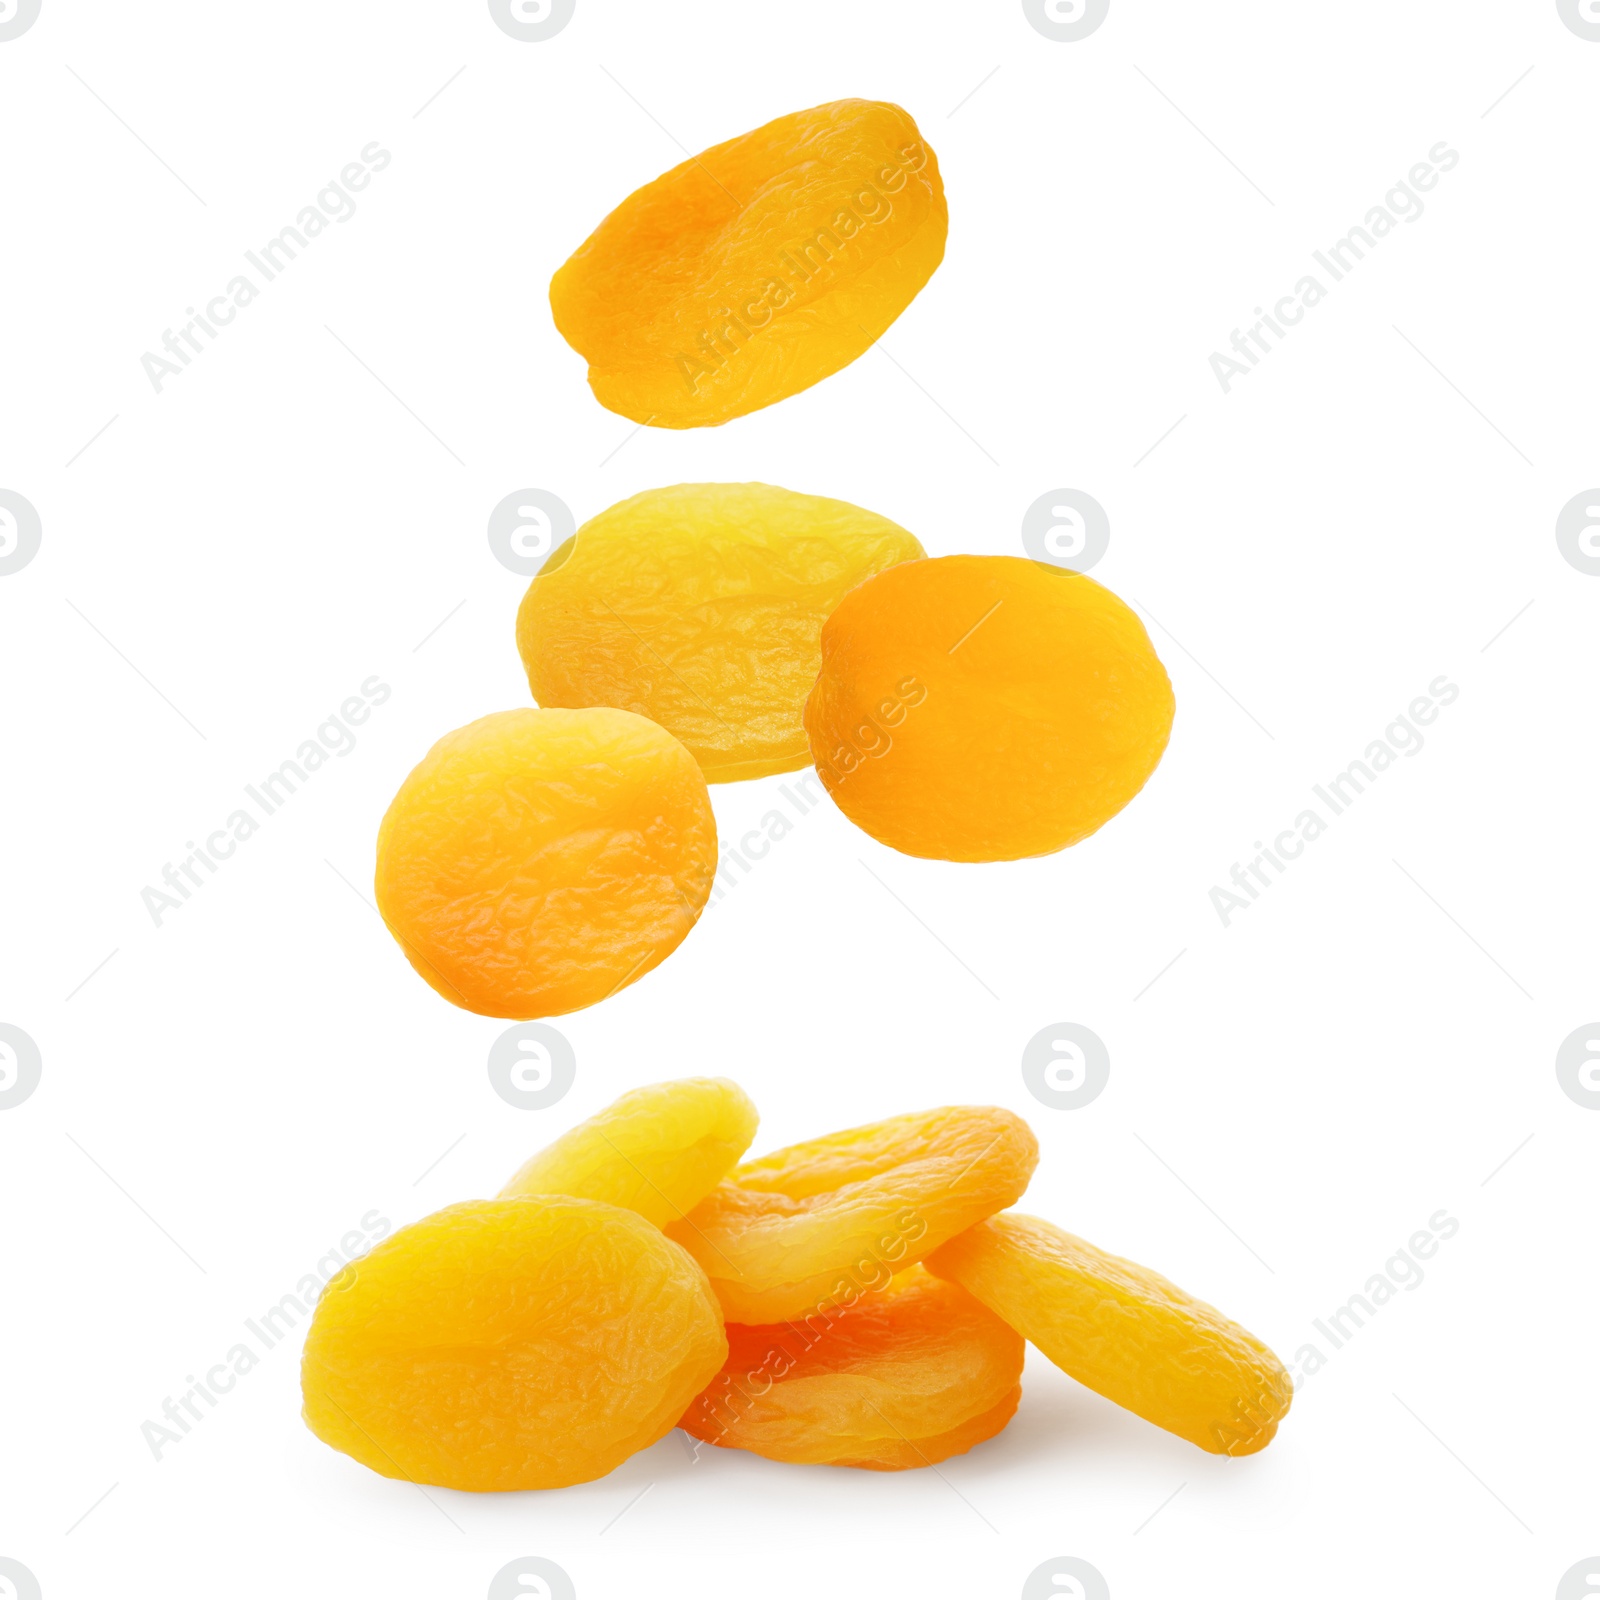 Image of Tasty dried apricots falling on white background